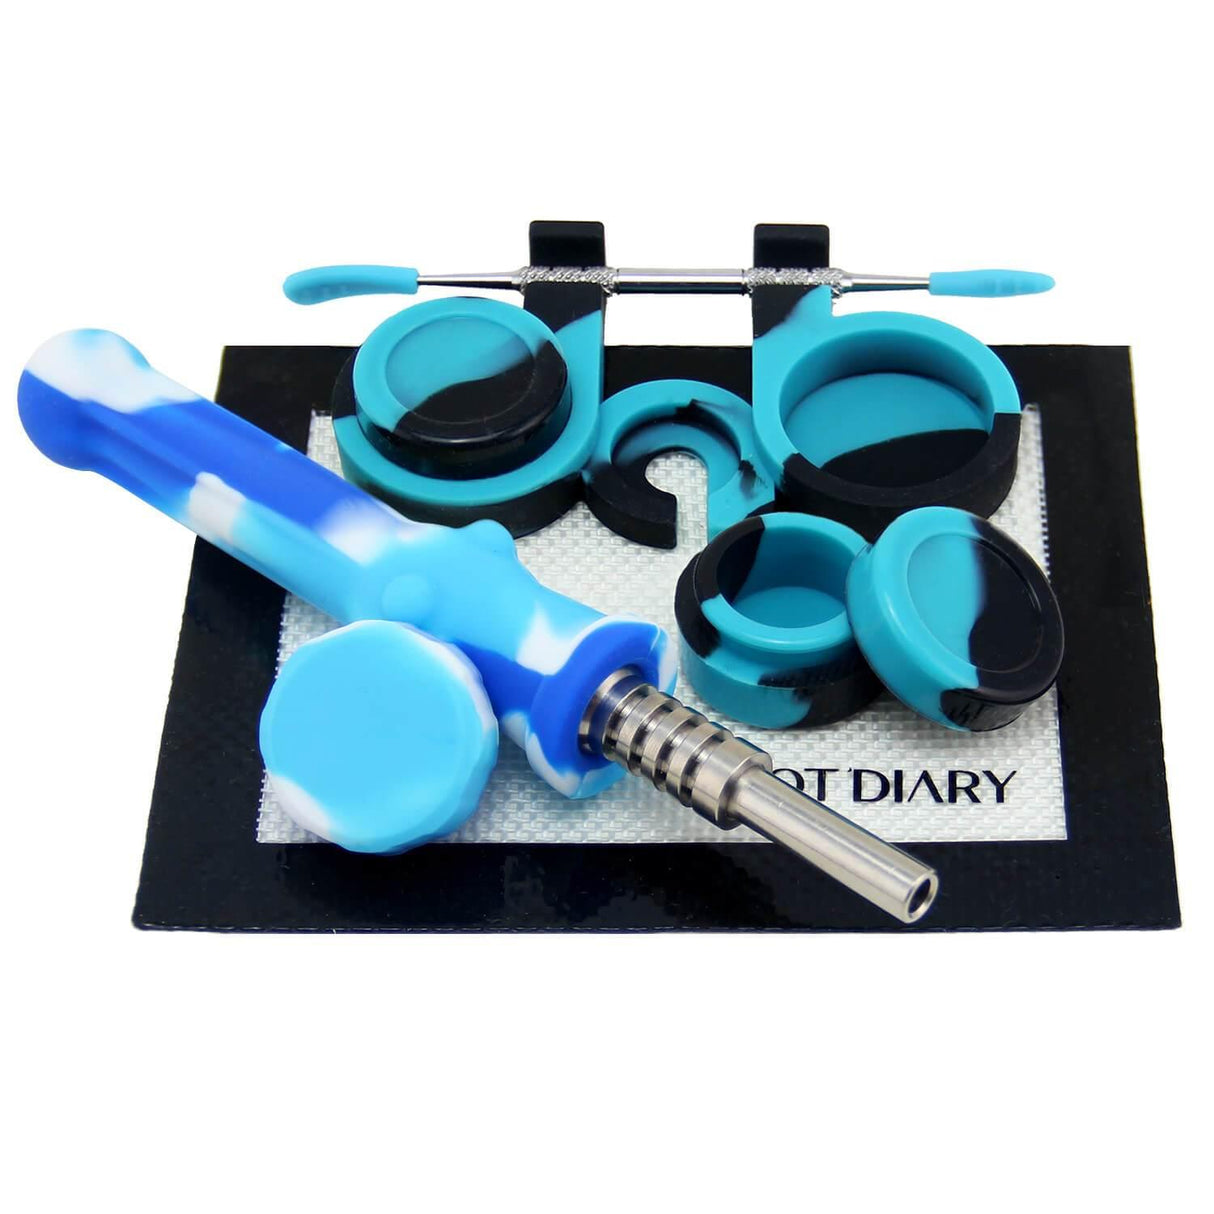 PILOT DIARY Silicone Nectar Collector Dab Kit with Accessories - Top View